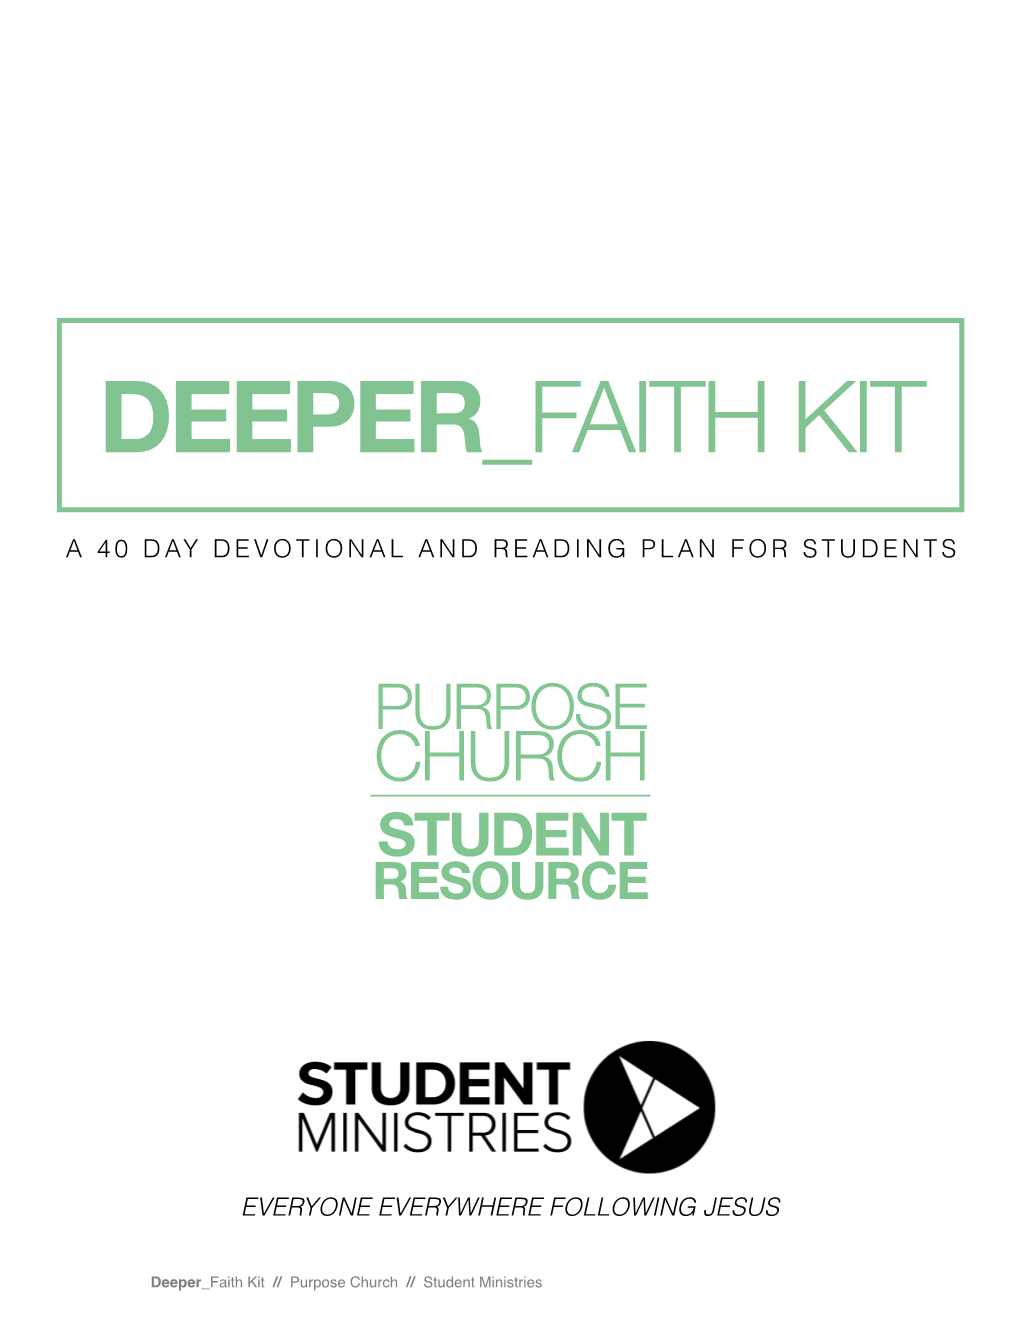 Deeper Faith Kit? What Is the Deeper